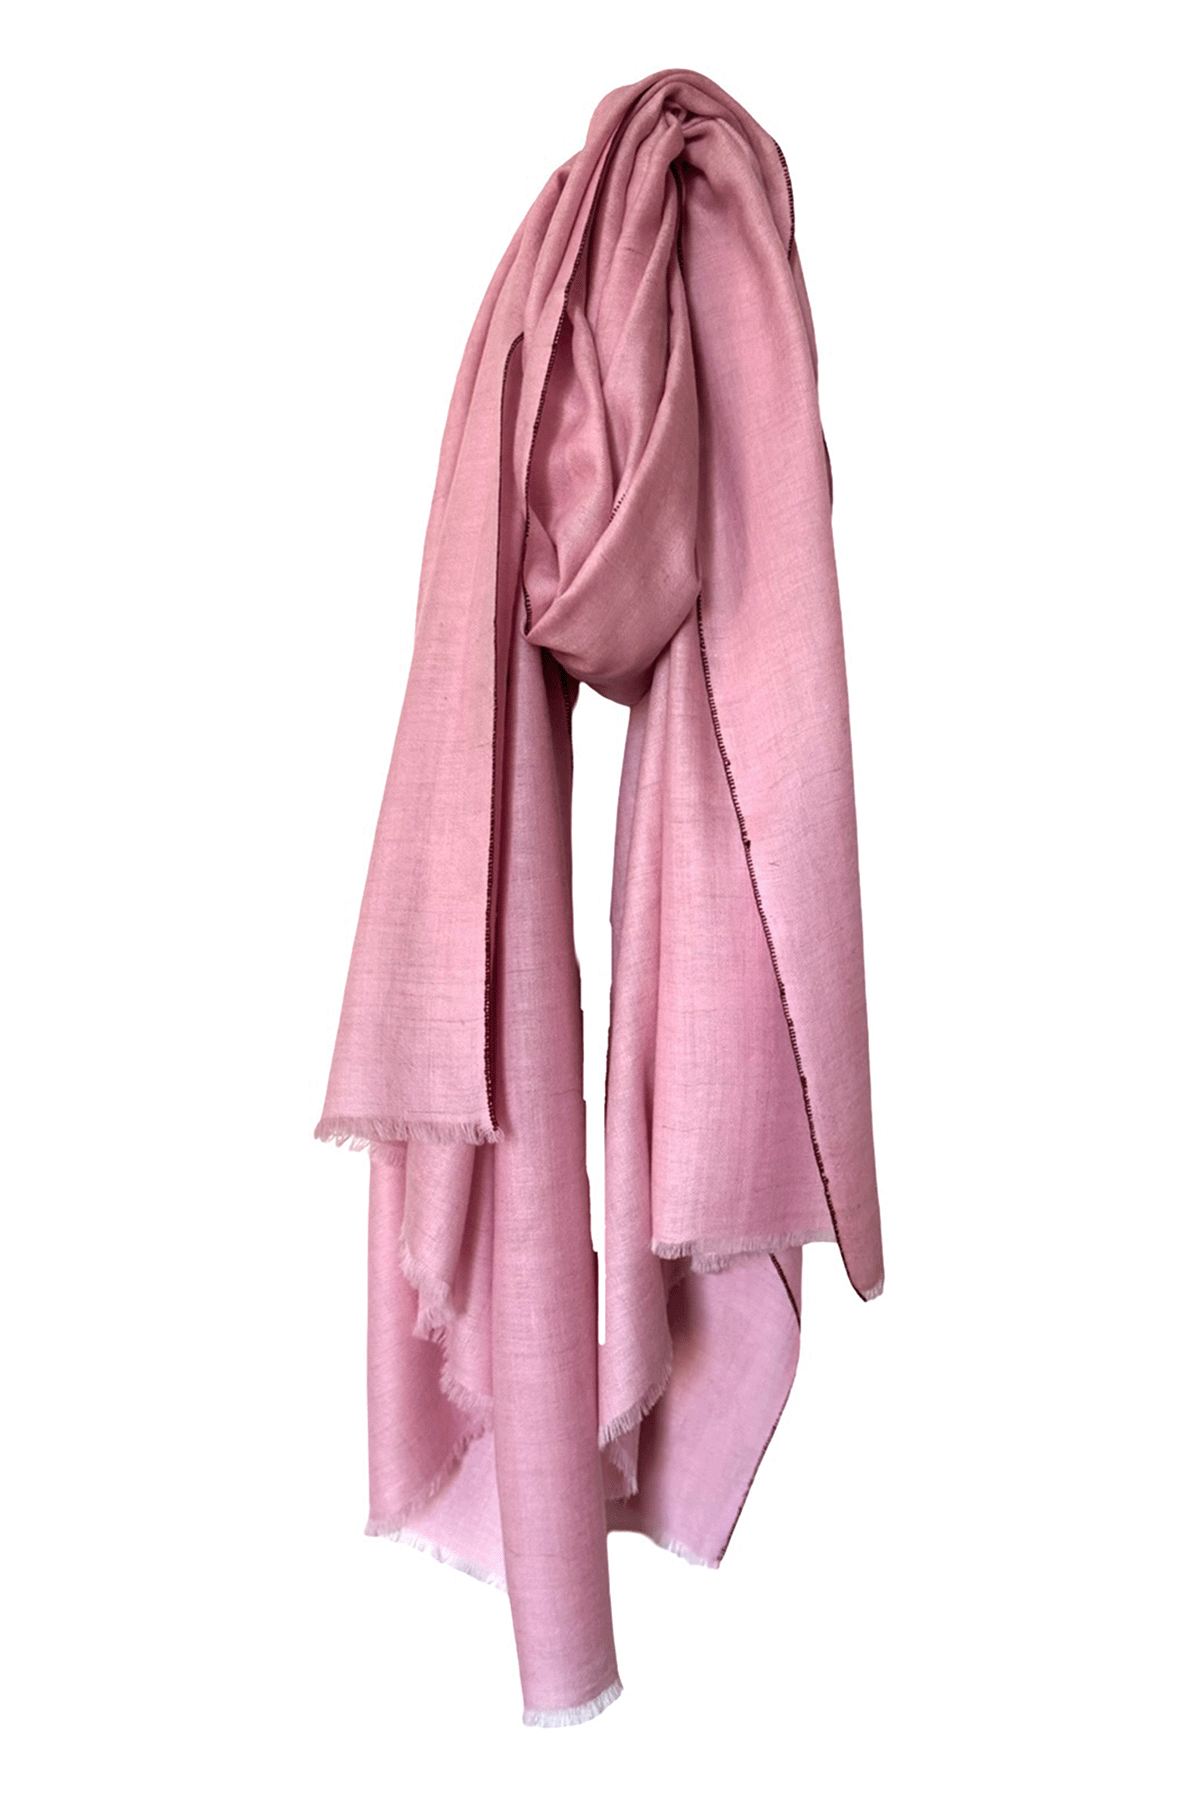 Classic Embroidered Edge Cashmere Pashmina Shawl - Dusty Pink